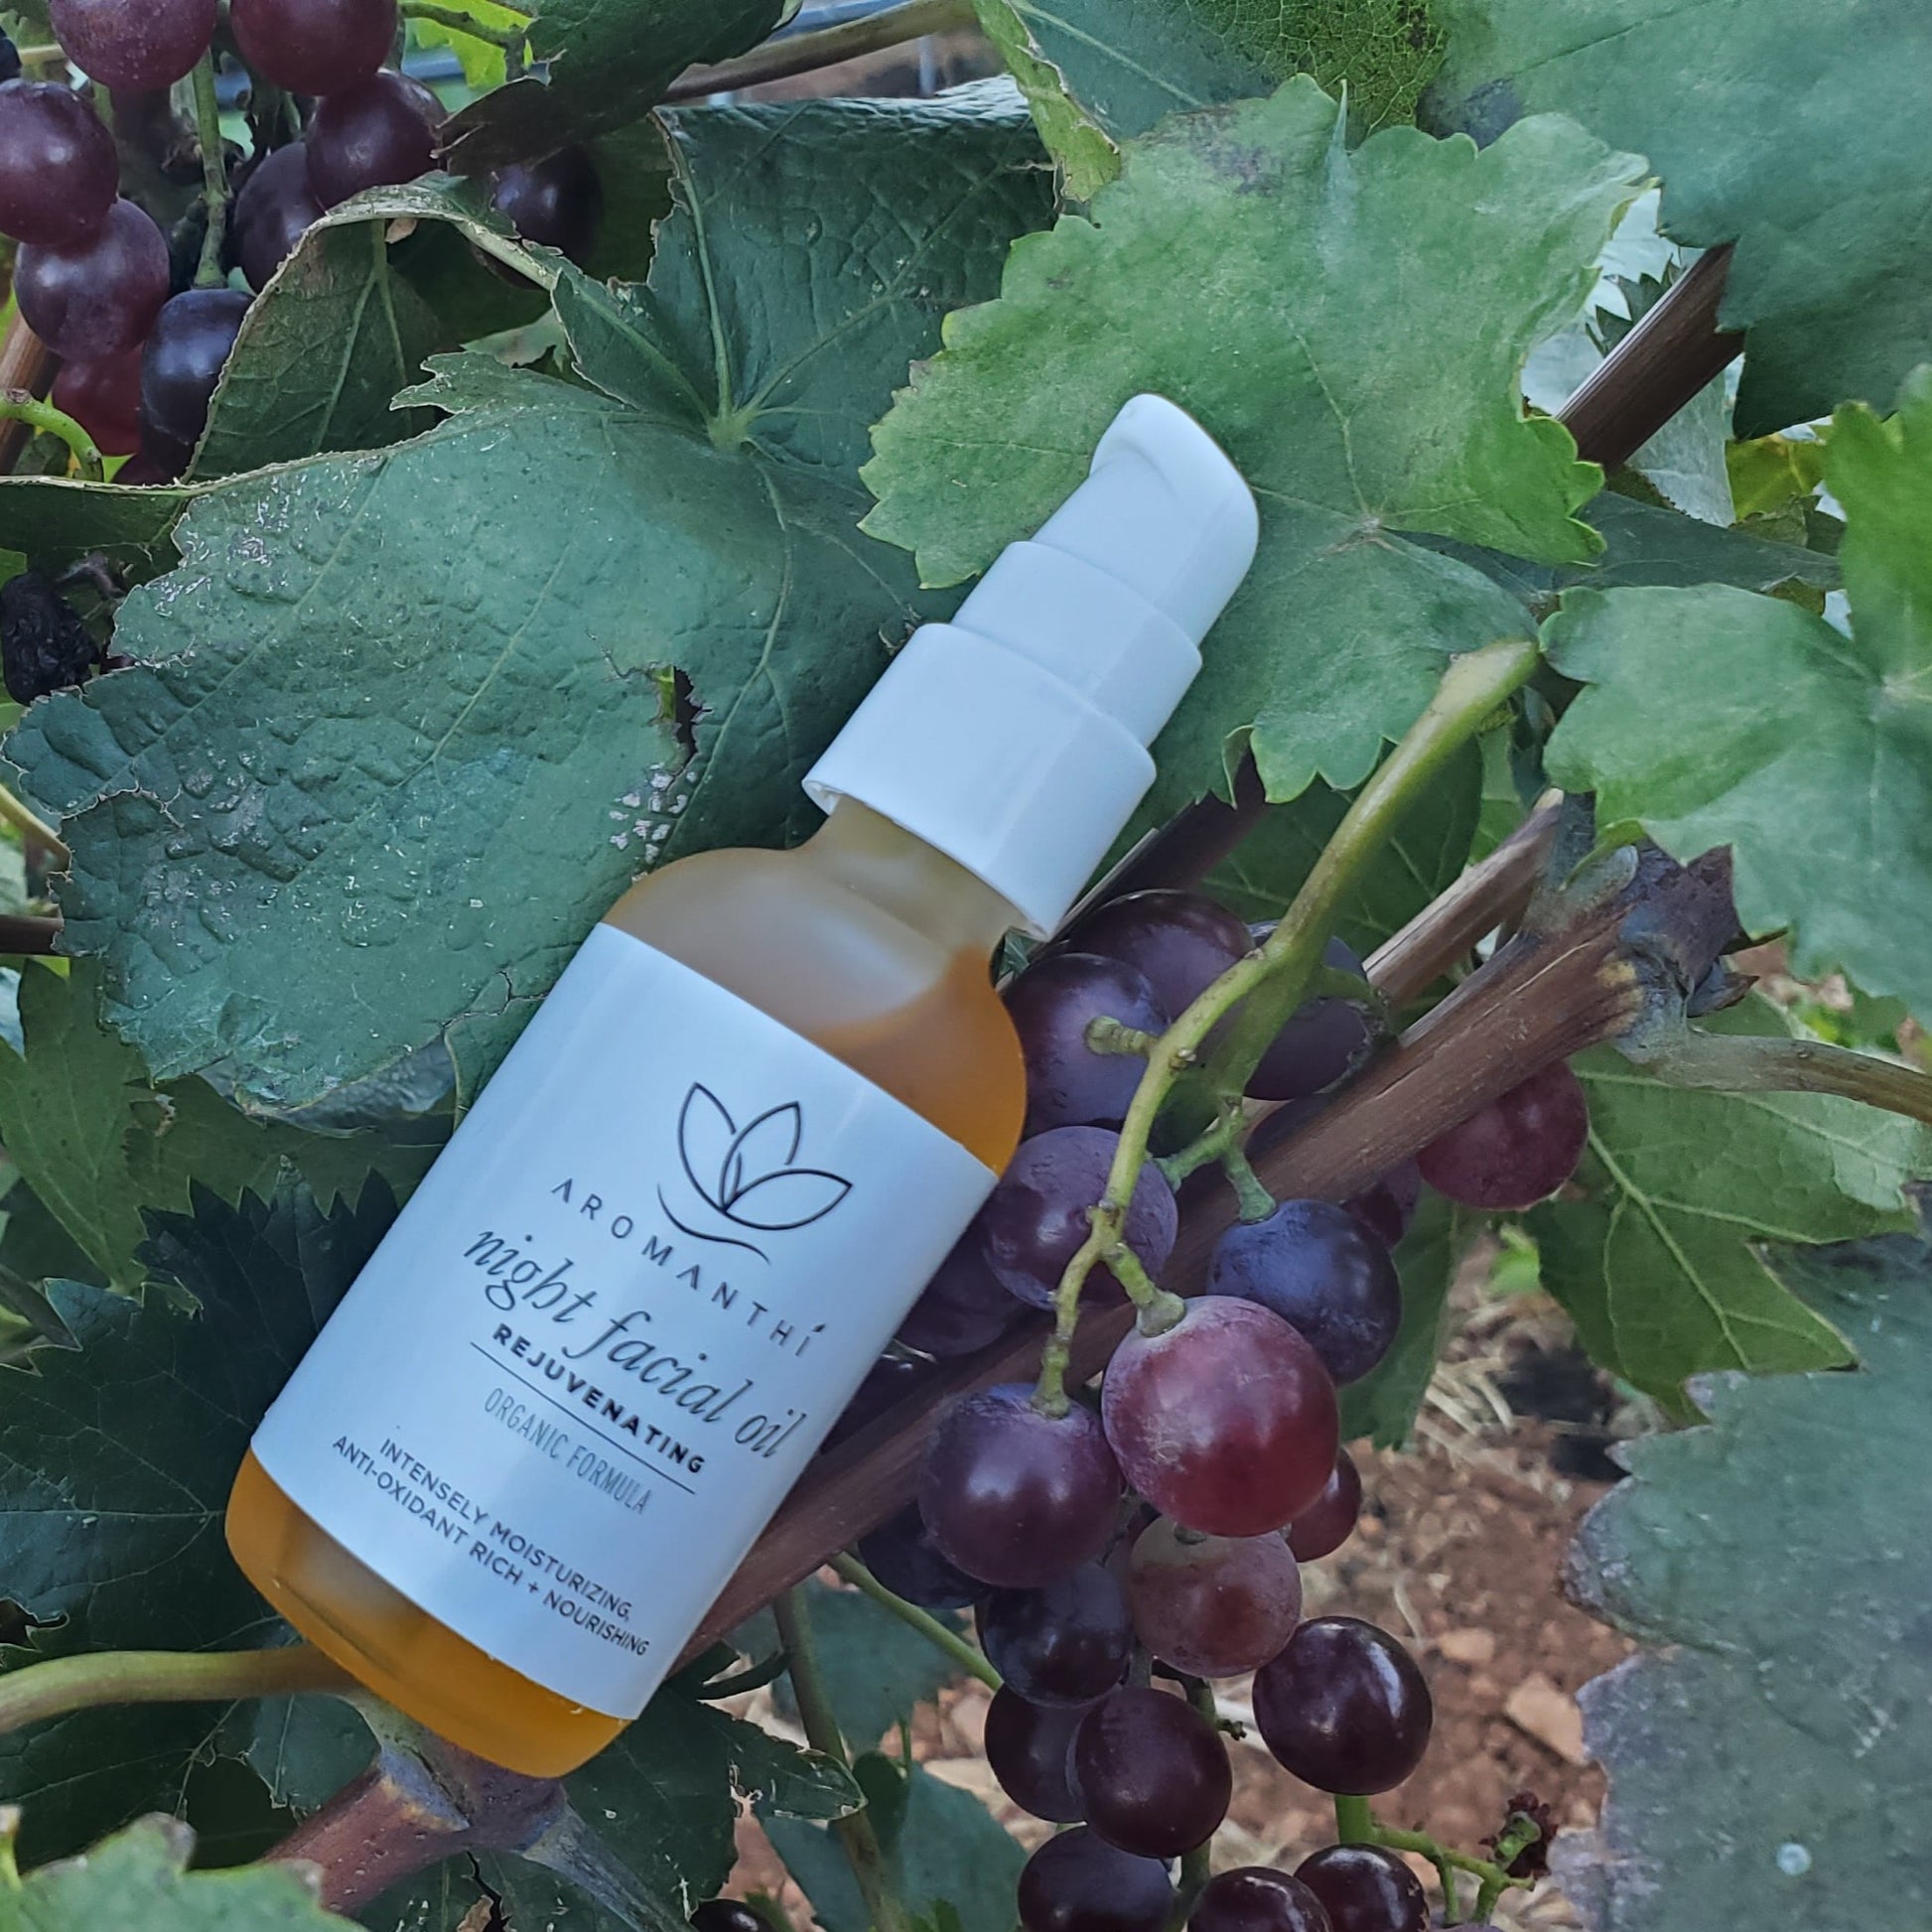 Night Facial Oil by Aromanthi is made with essential oils, rosehip seed and grapeseed oils. The bottle lays on a grapevine.